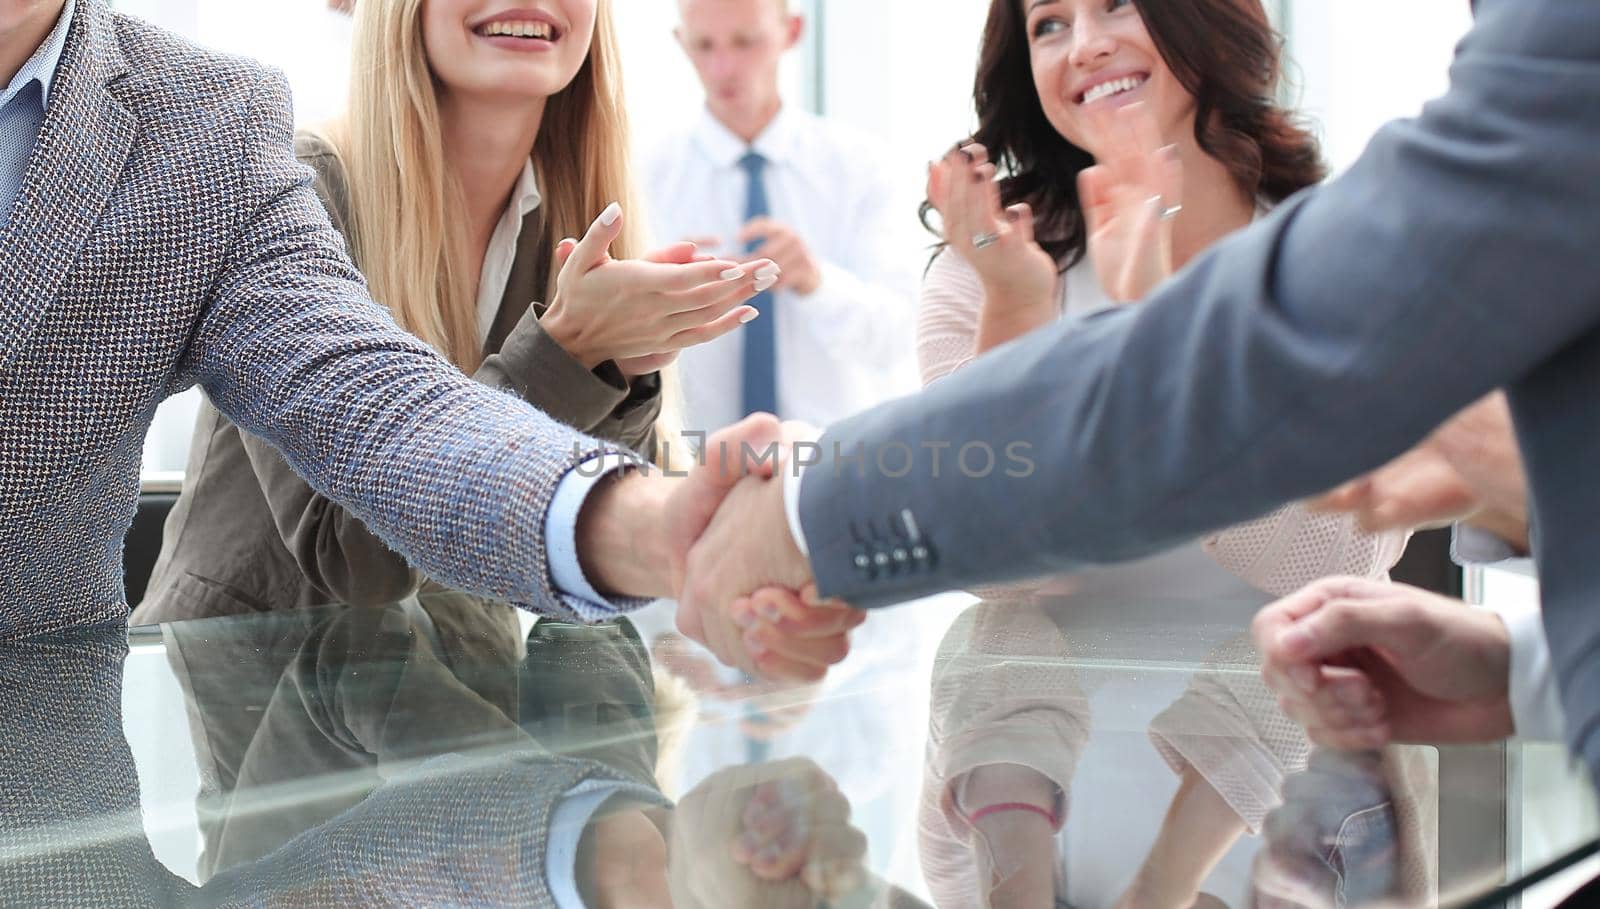 business partners shaking hands during a meeting. photo with copy space